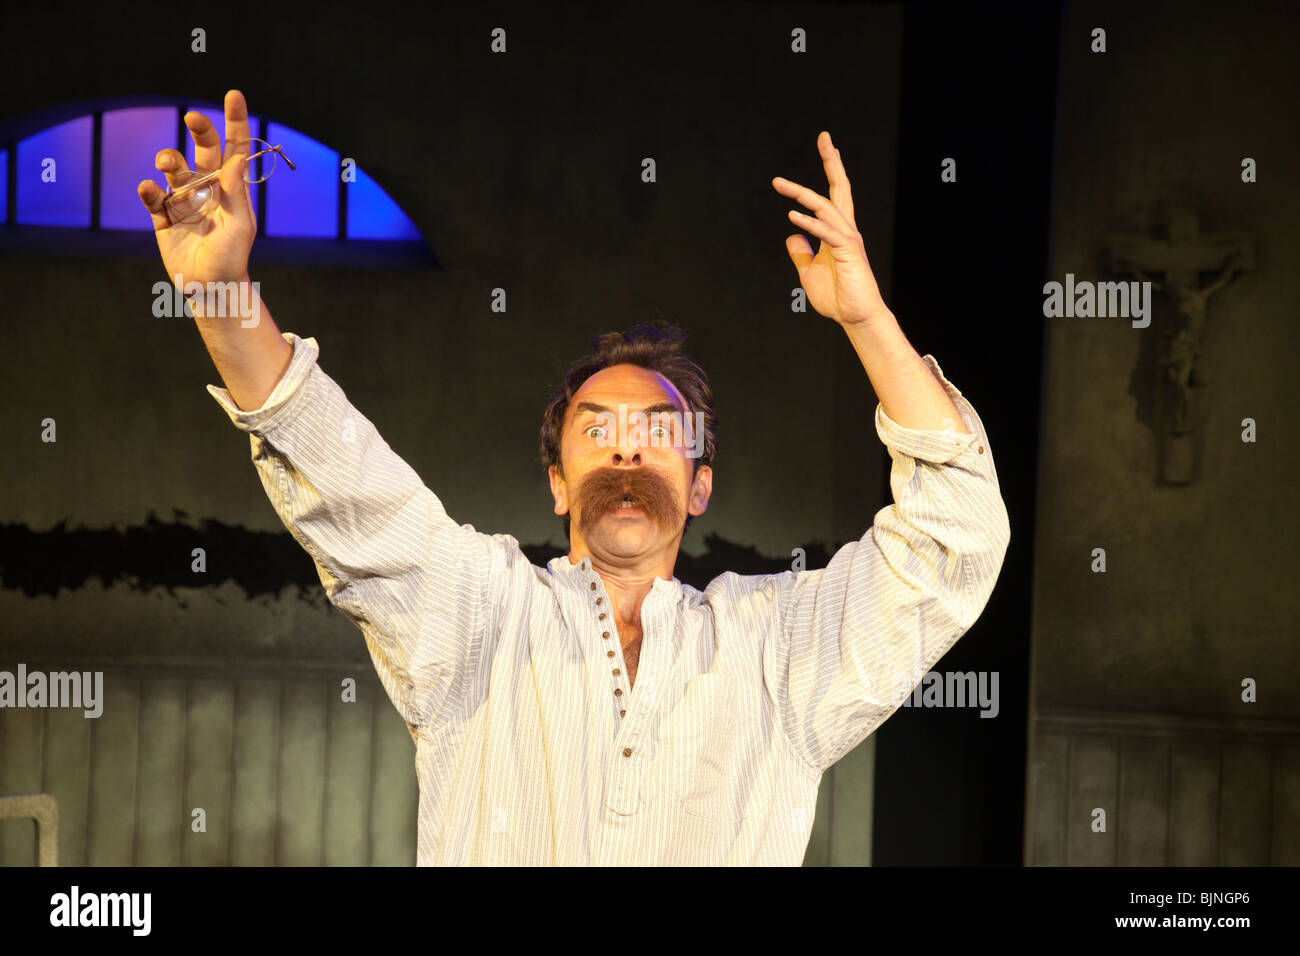 Jud Charlton playing German philosopher Friedrich Nietzsche in the stage play 'Twilight of the Gods' written by Julian Doyle. Stock Photo